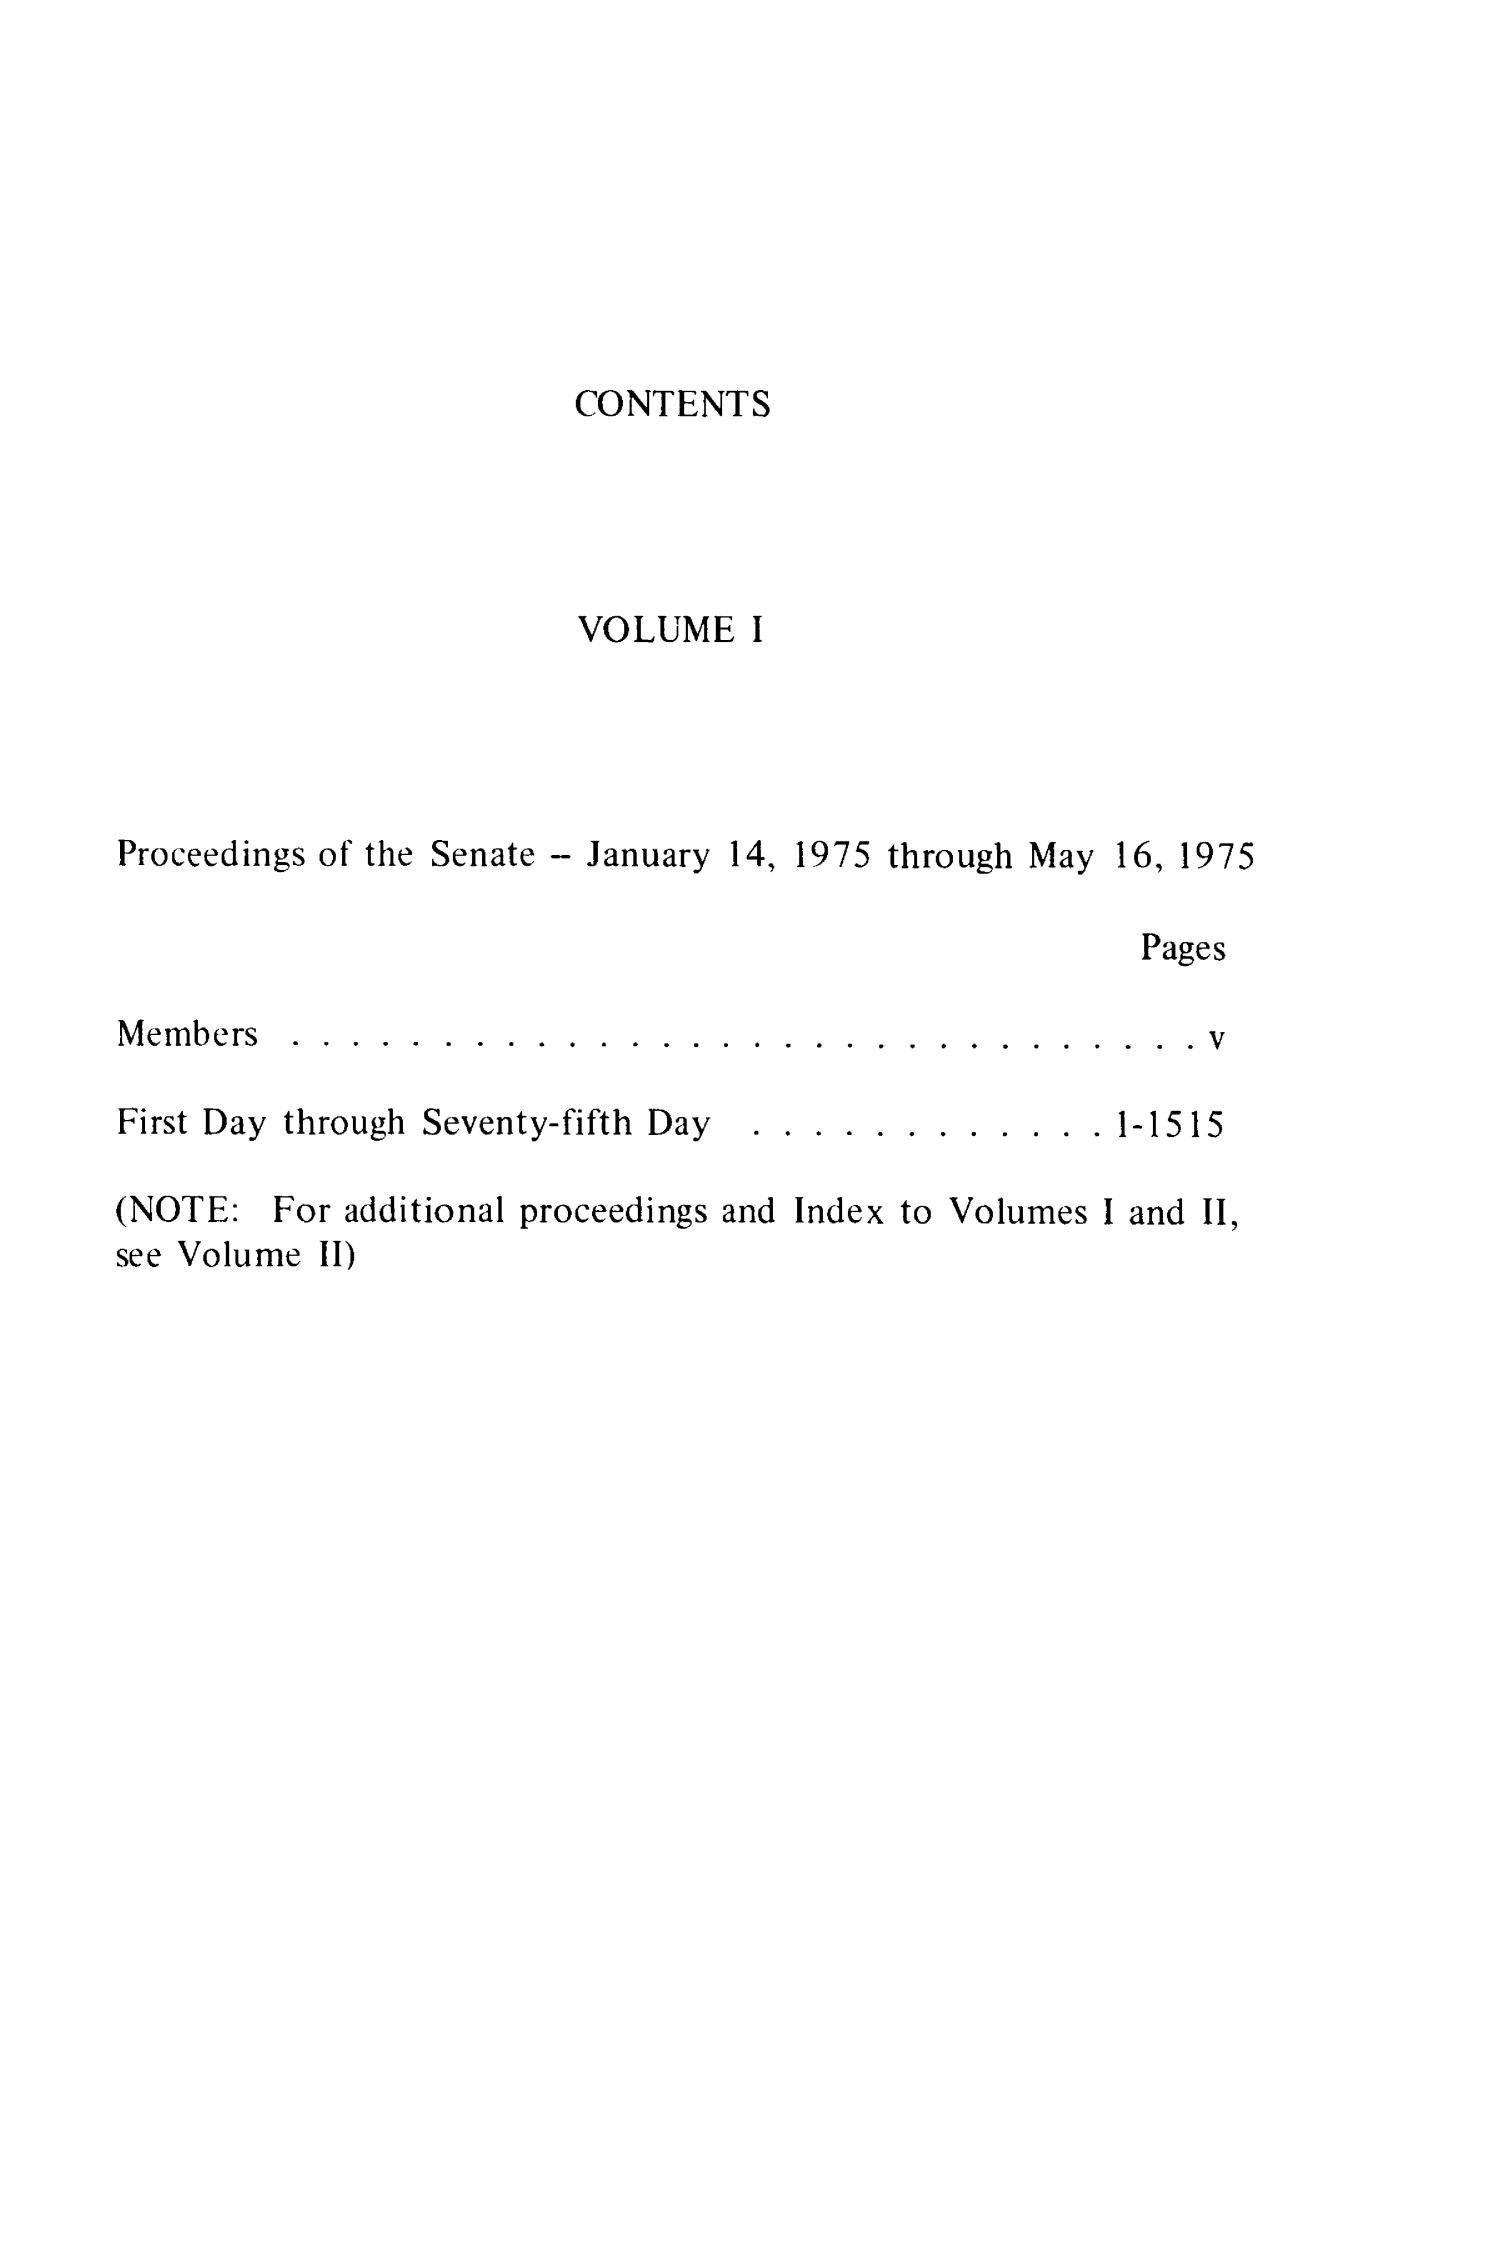 Journal of the Senate of the State of Texas, Regular Session of the Sixty-Fourth Legislature, Volume 1
                                                
                                                    None
                                                